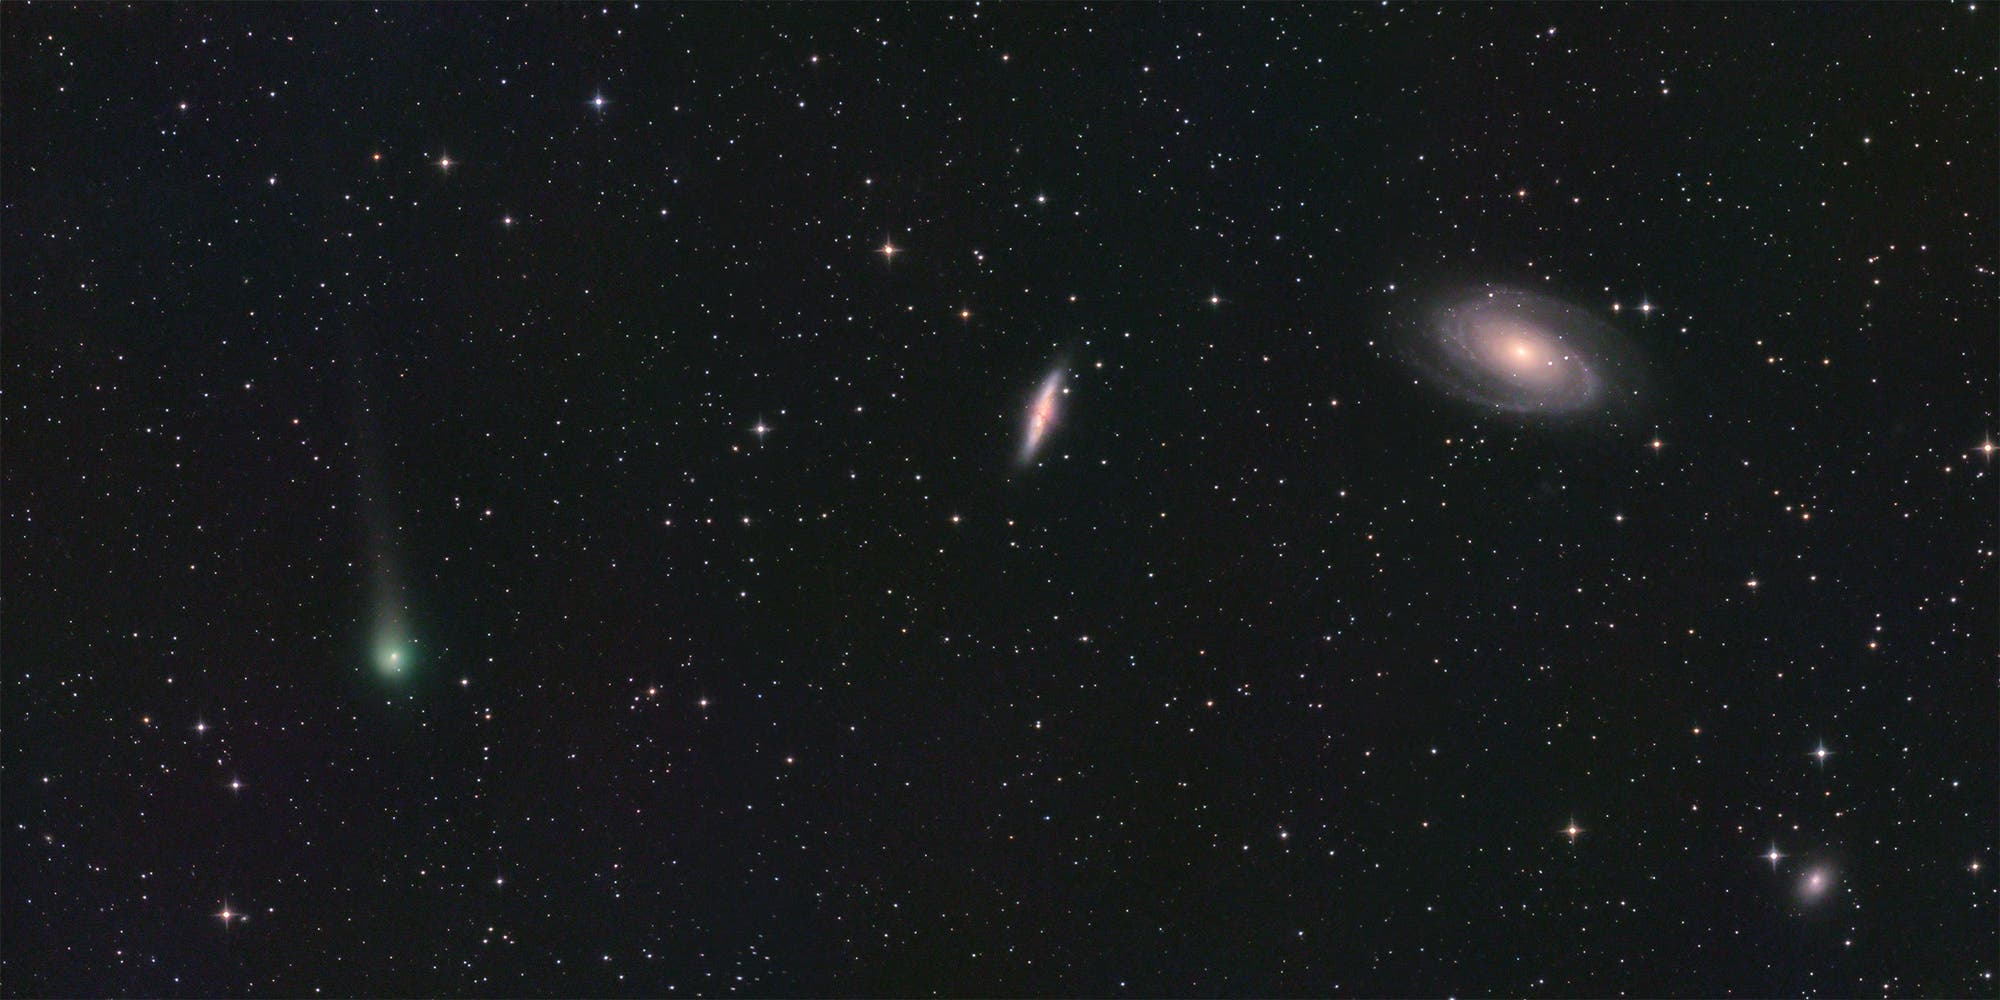 Comet C/2017 PANSTARRS and galaxies M 81 and M 82